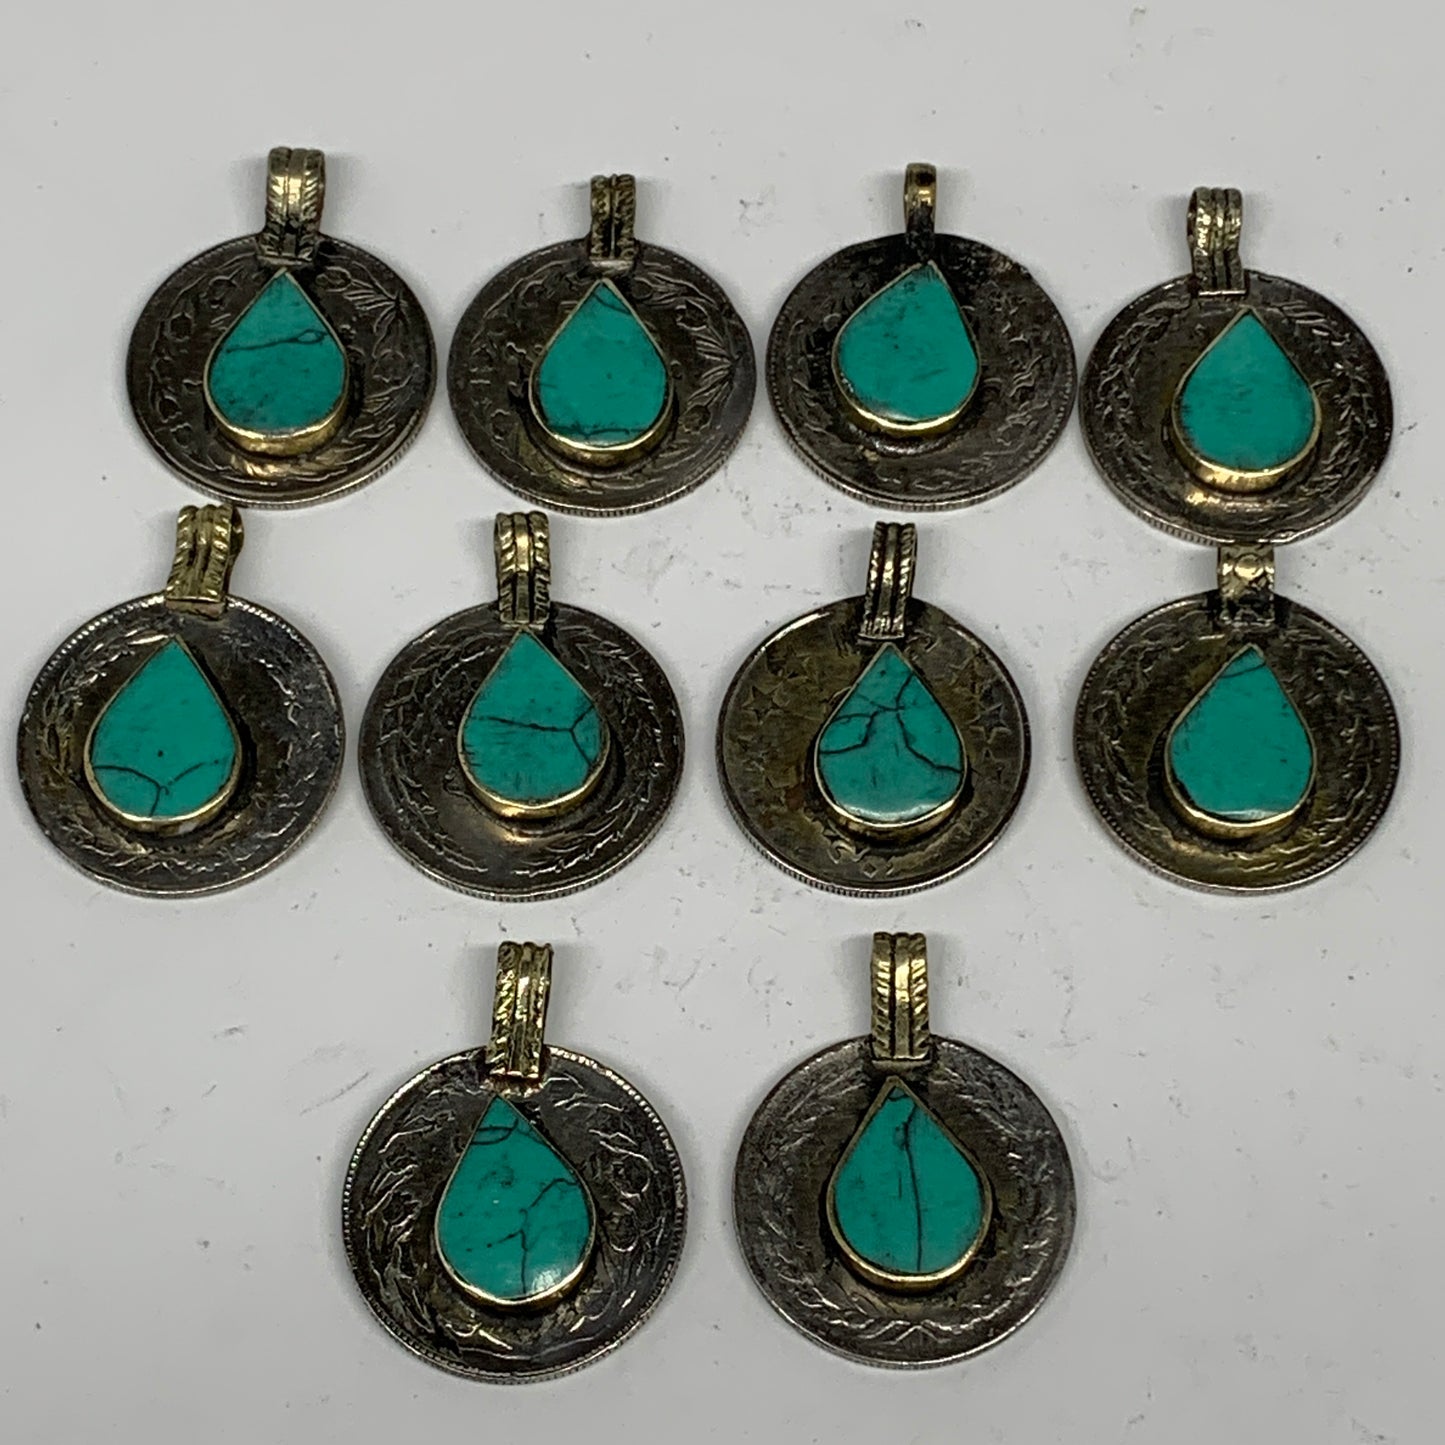 87g, 10pcs, Turkmen Coins Jeweled Synthetic Turquoise Tribal @Afghanistan, B1450